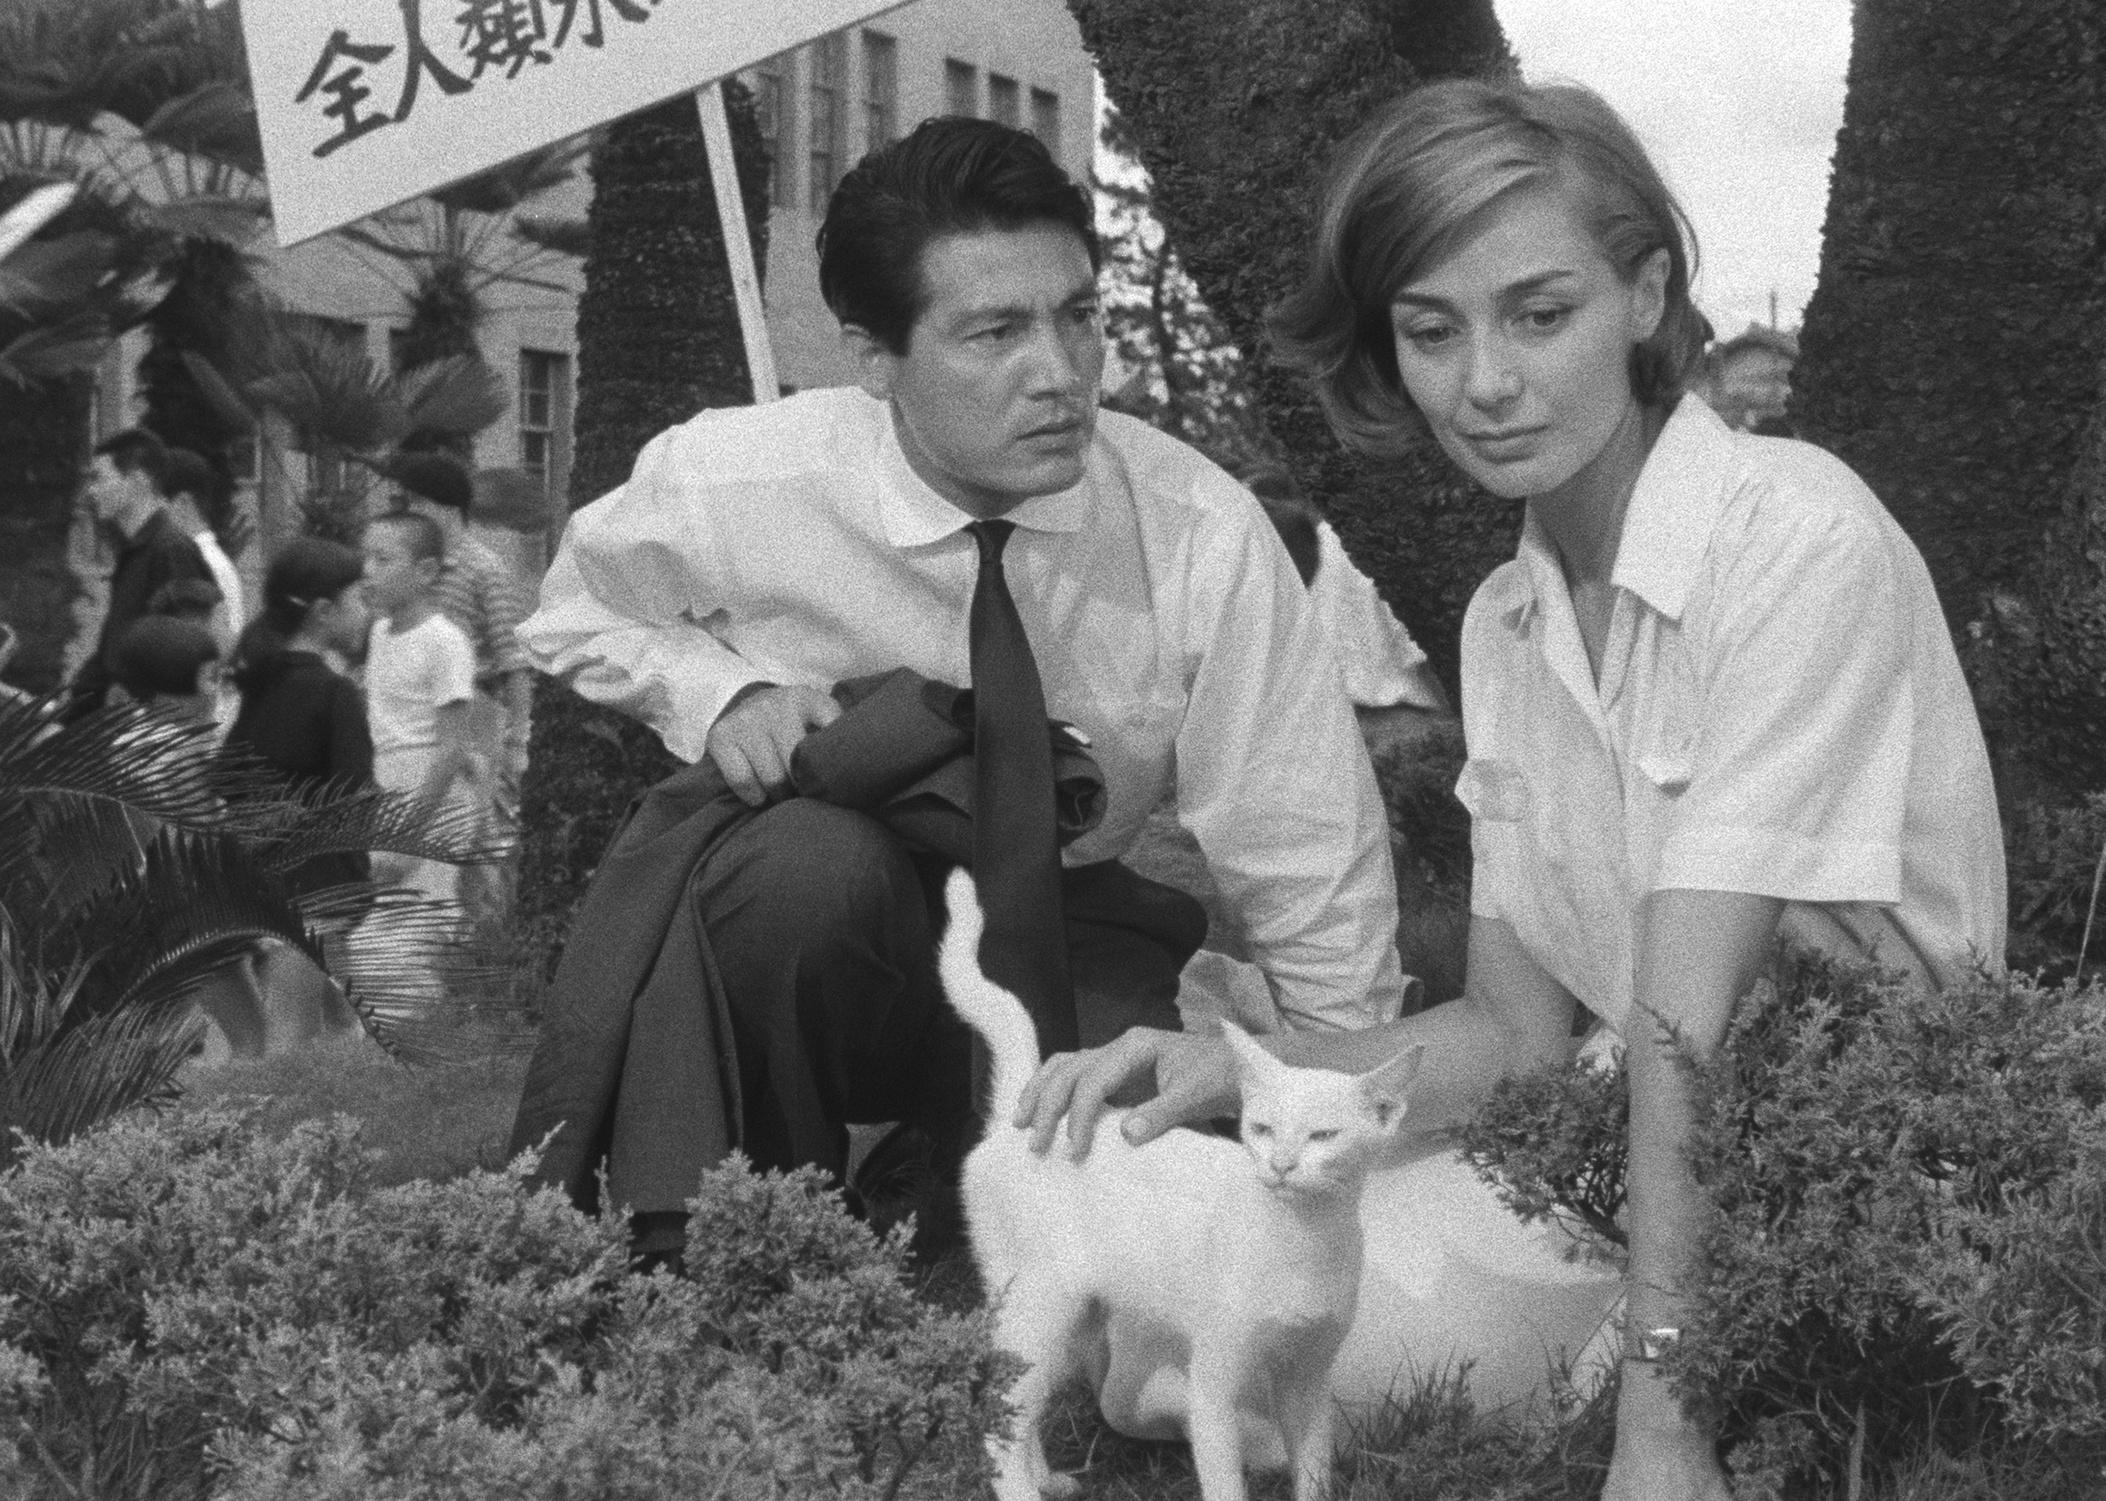 A man in a suit kneeling down to talk to a woman petting a white cat next to a tree.